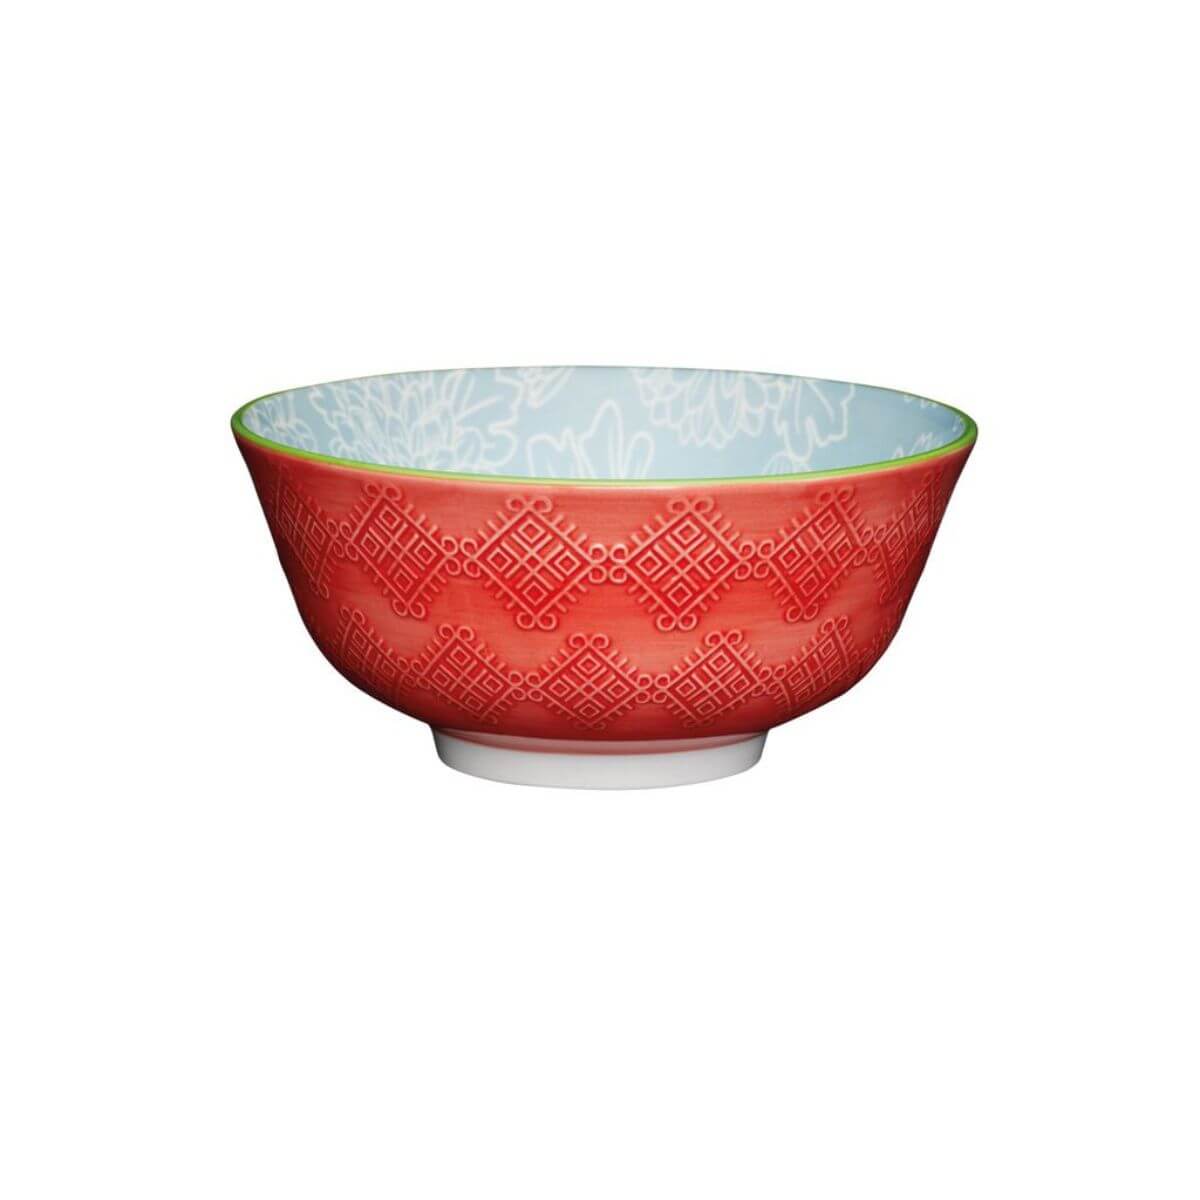 Mikasa Does it All Bowl 15.7cm Grey Floral